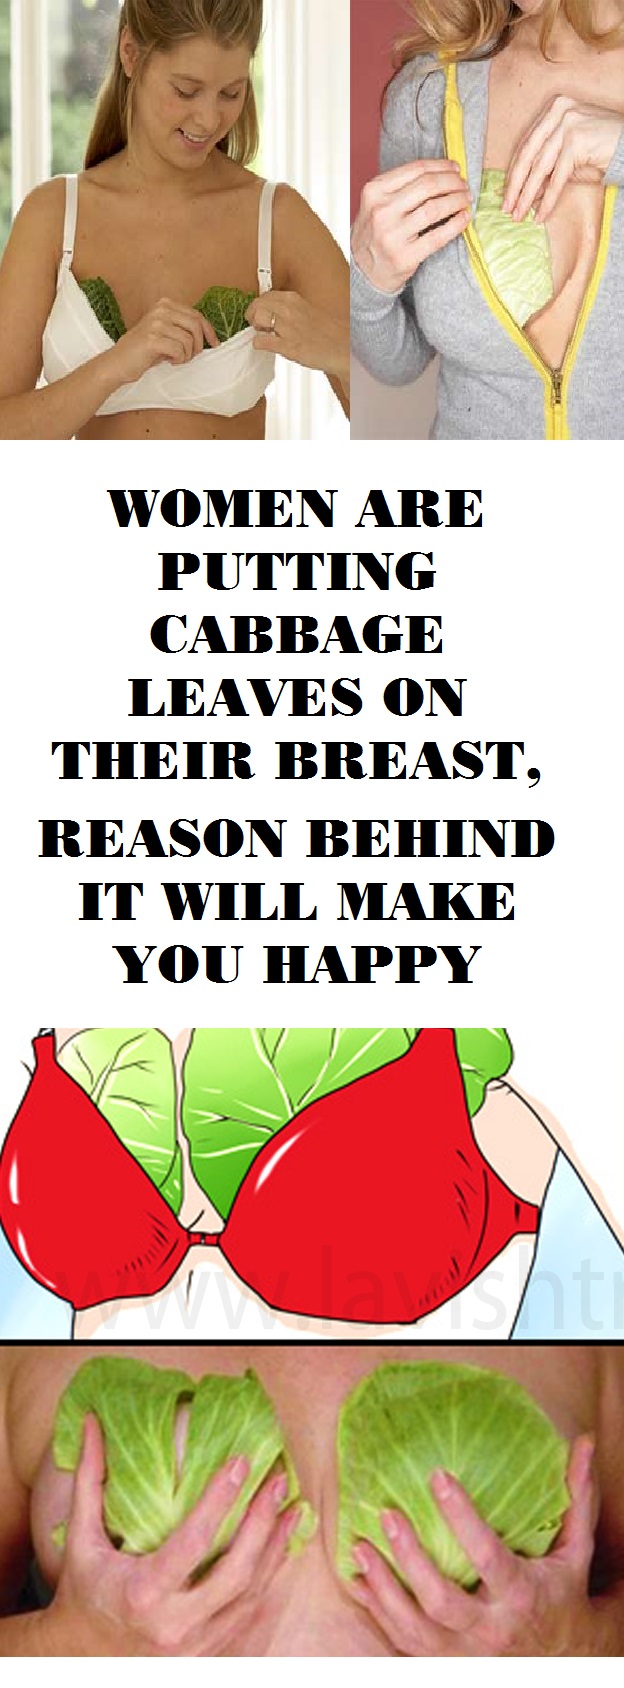 cabbage-leaves-in-breast-and-legs